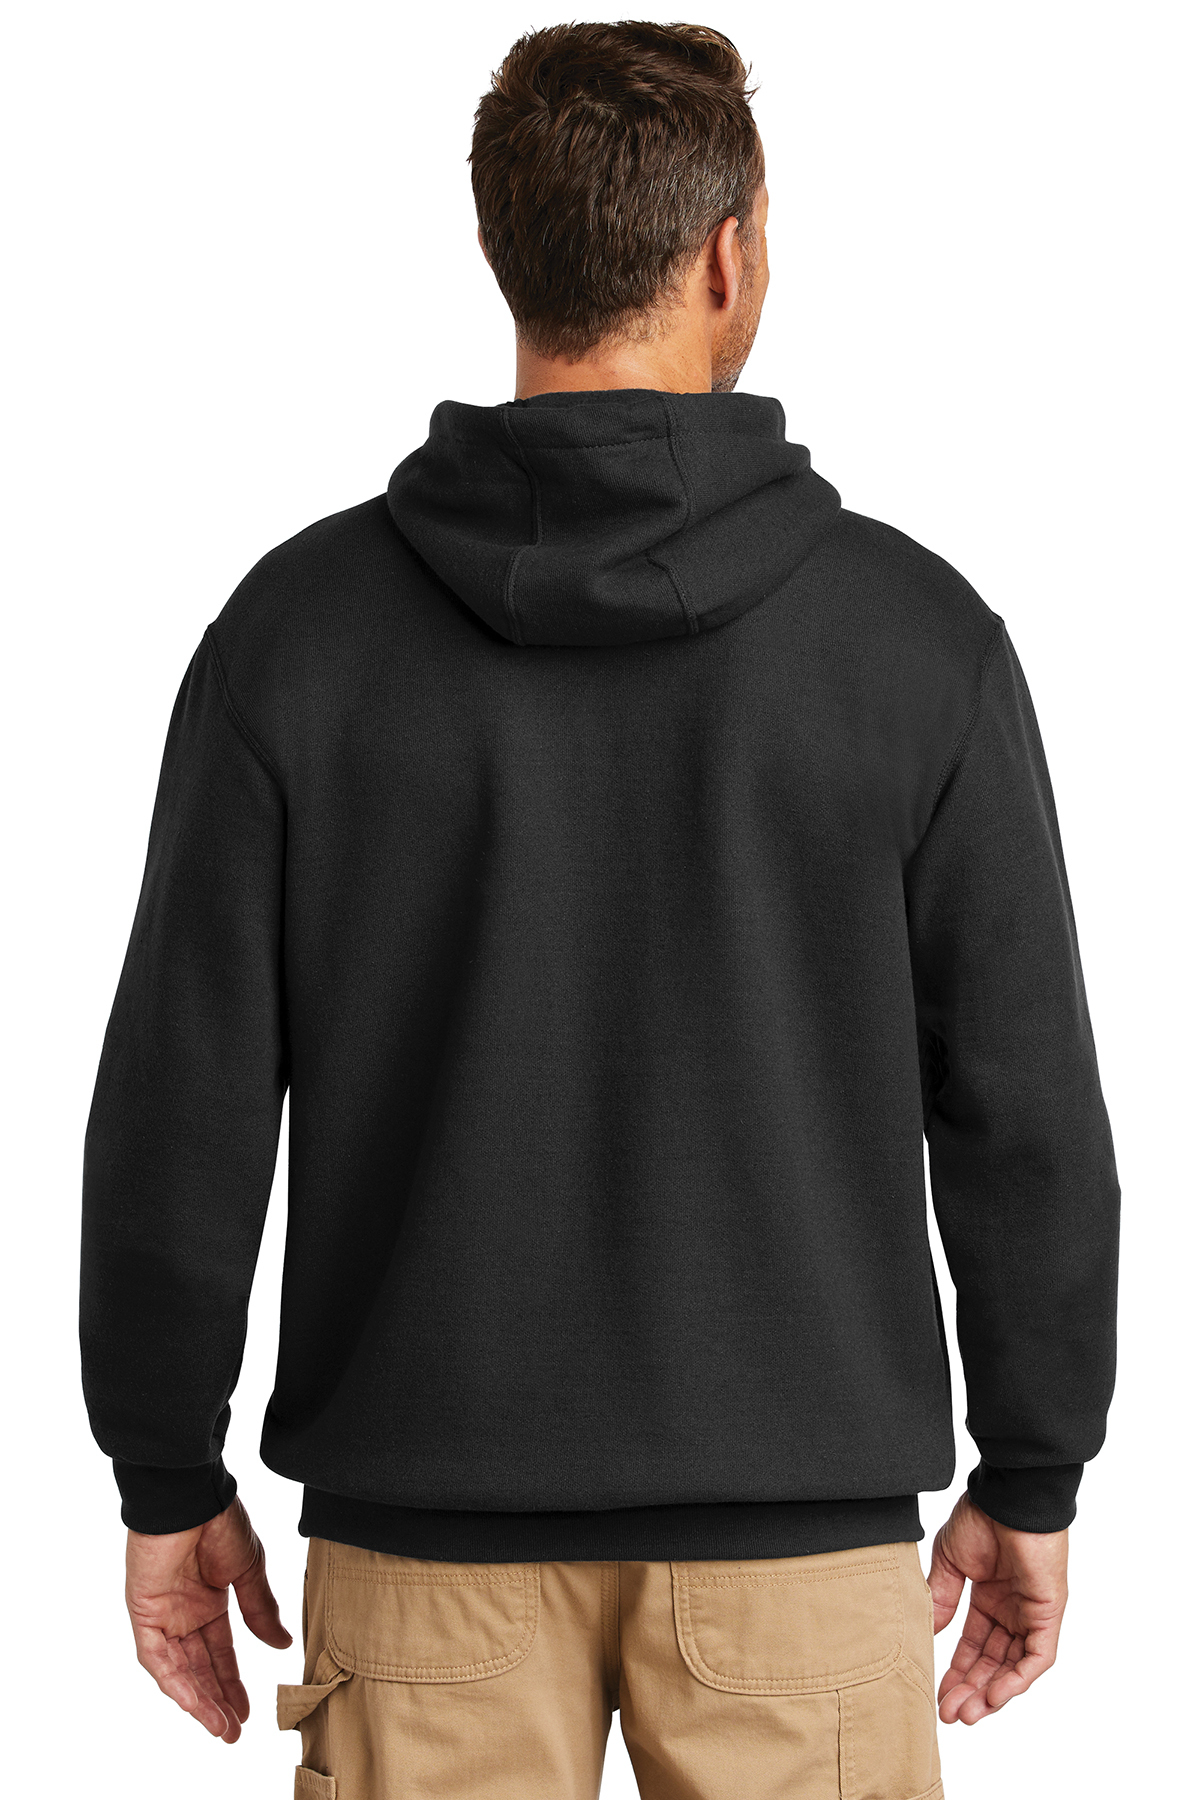 Carhartt Midweight Hooded Sweatshirt | Product | Company Casuals